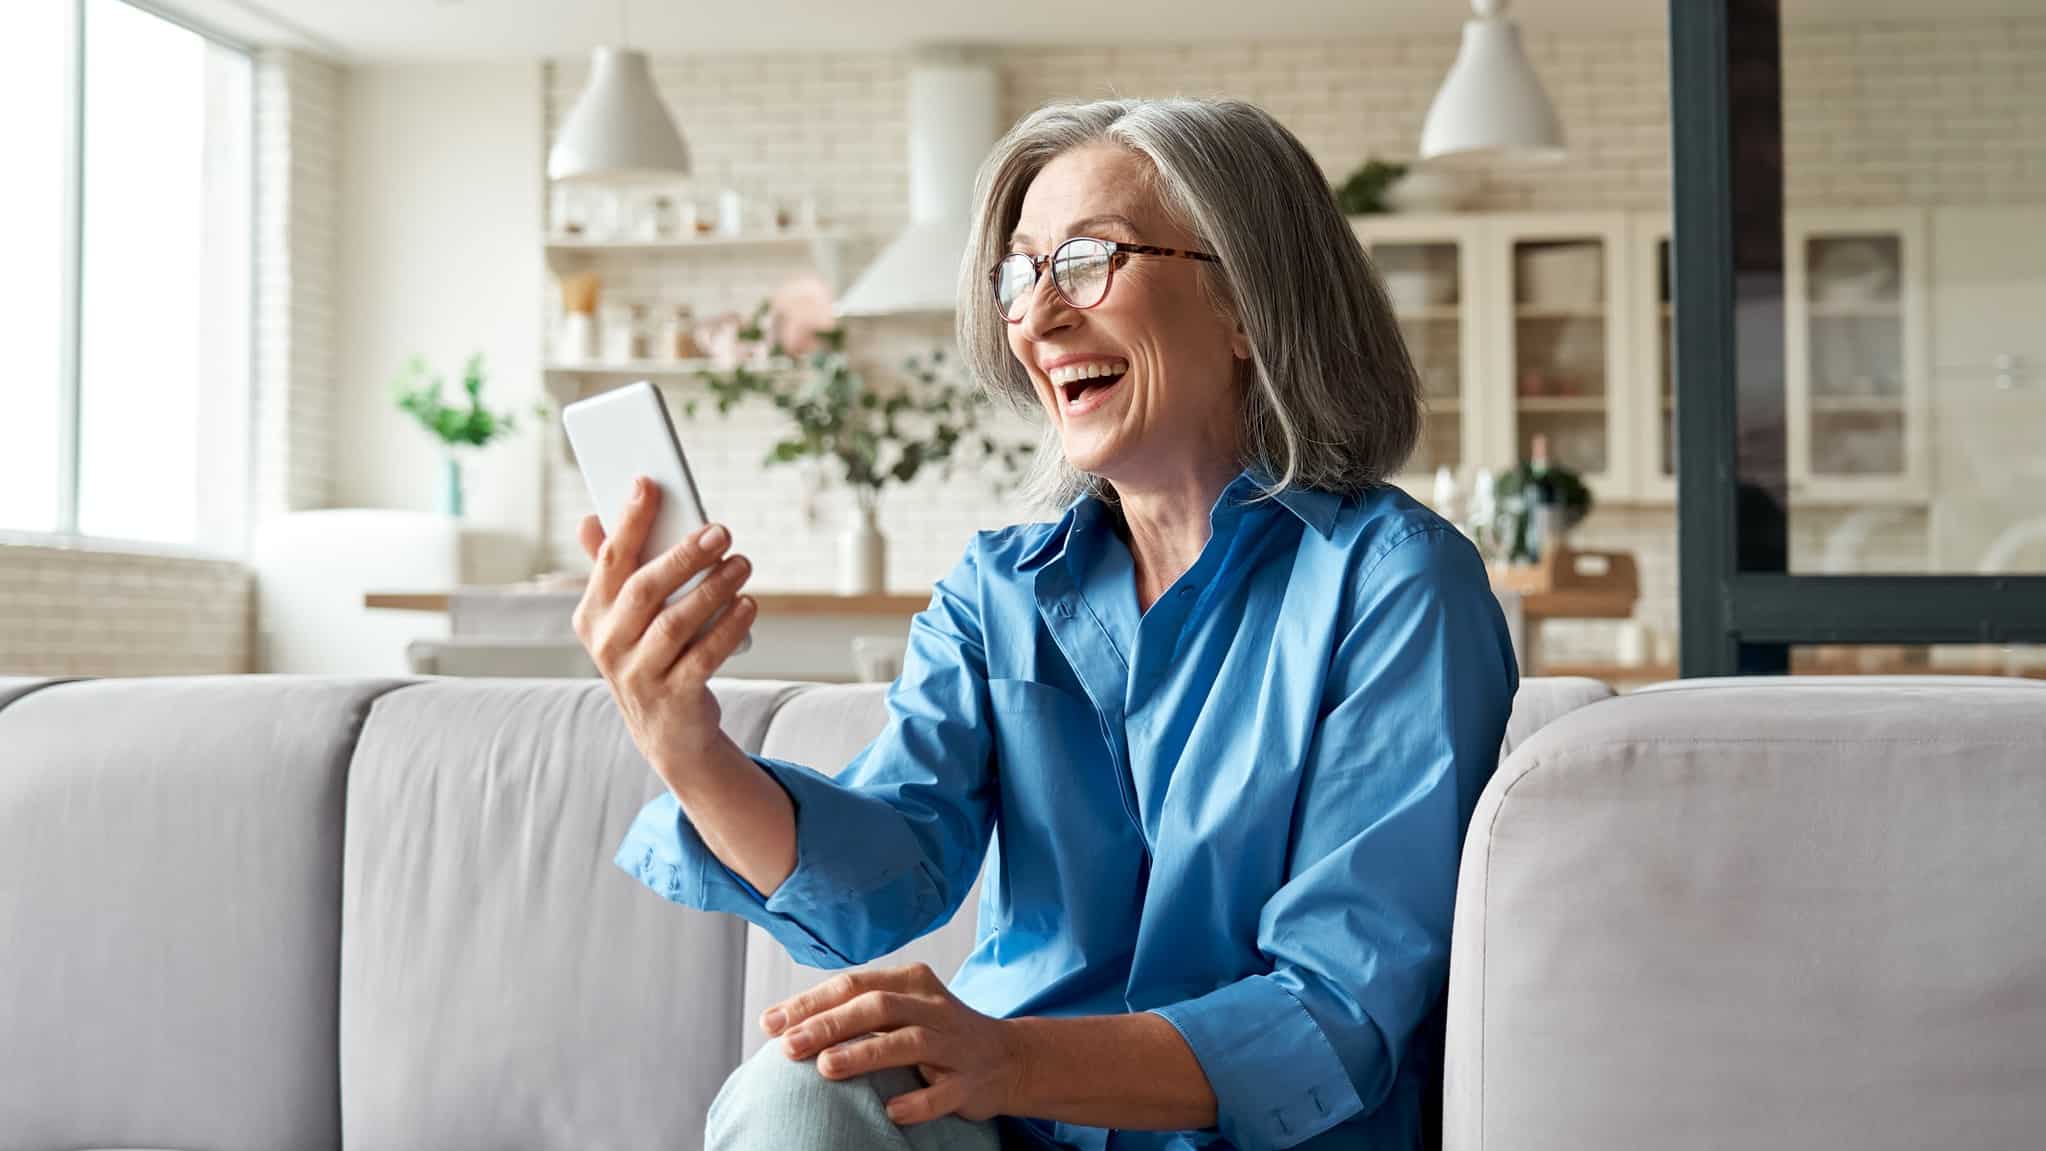 A sophisticated older lady with shoulder-length grey hair and glasses sits on her couch laughing while looking at her Neometals shares rising on her smartphone